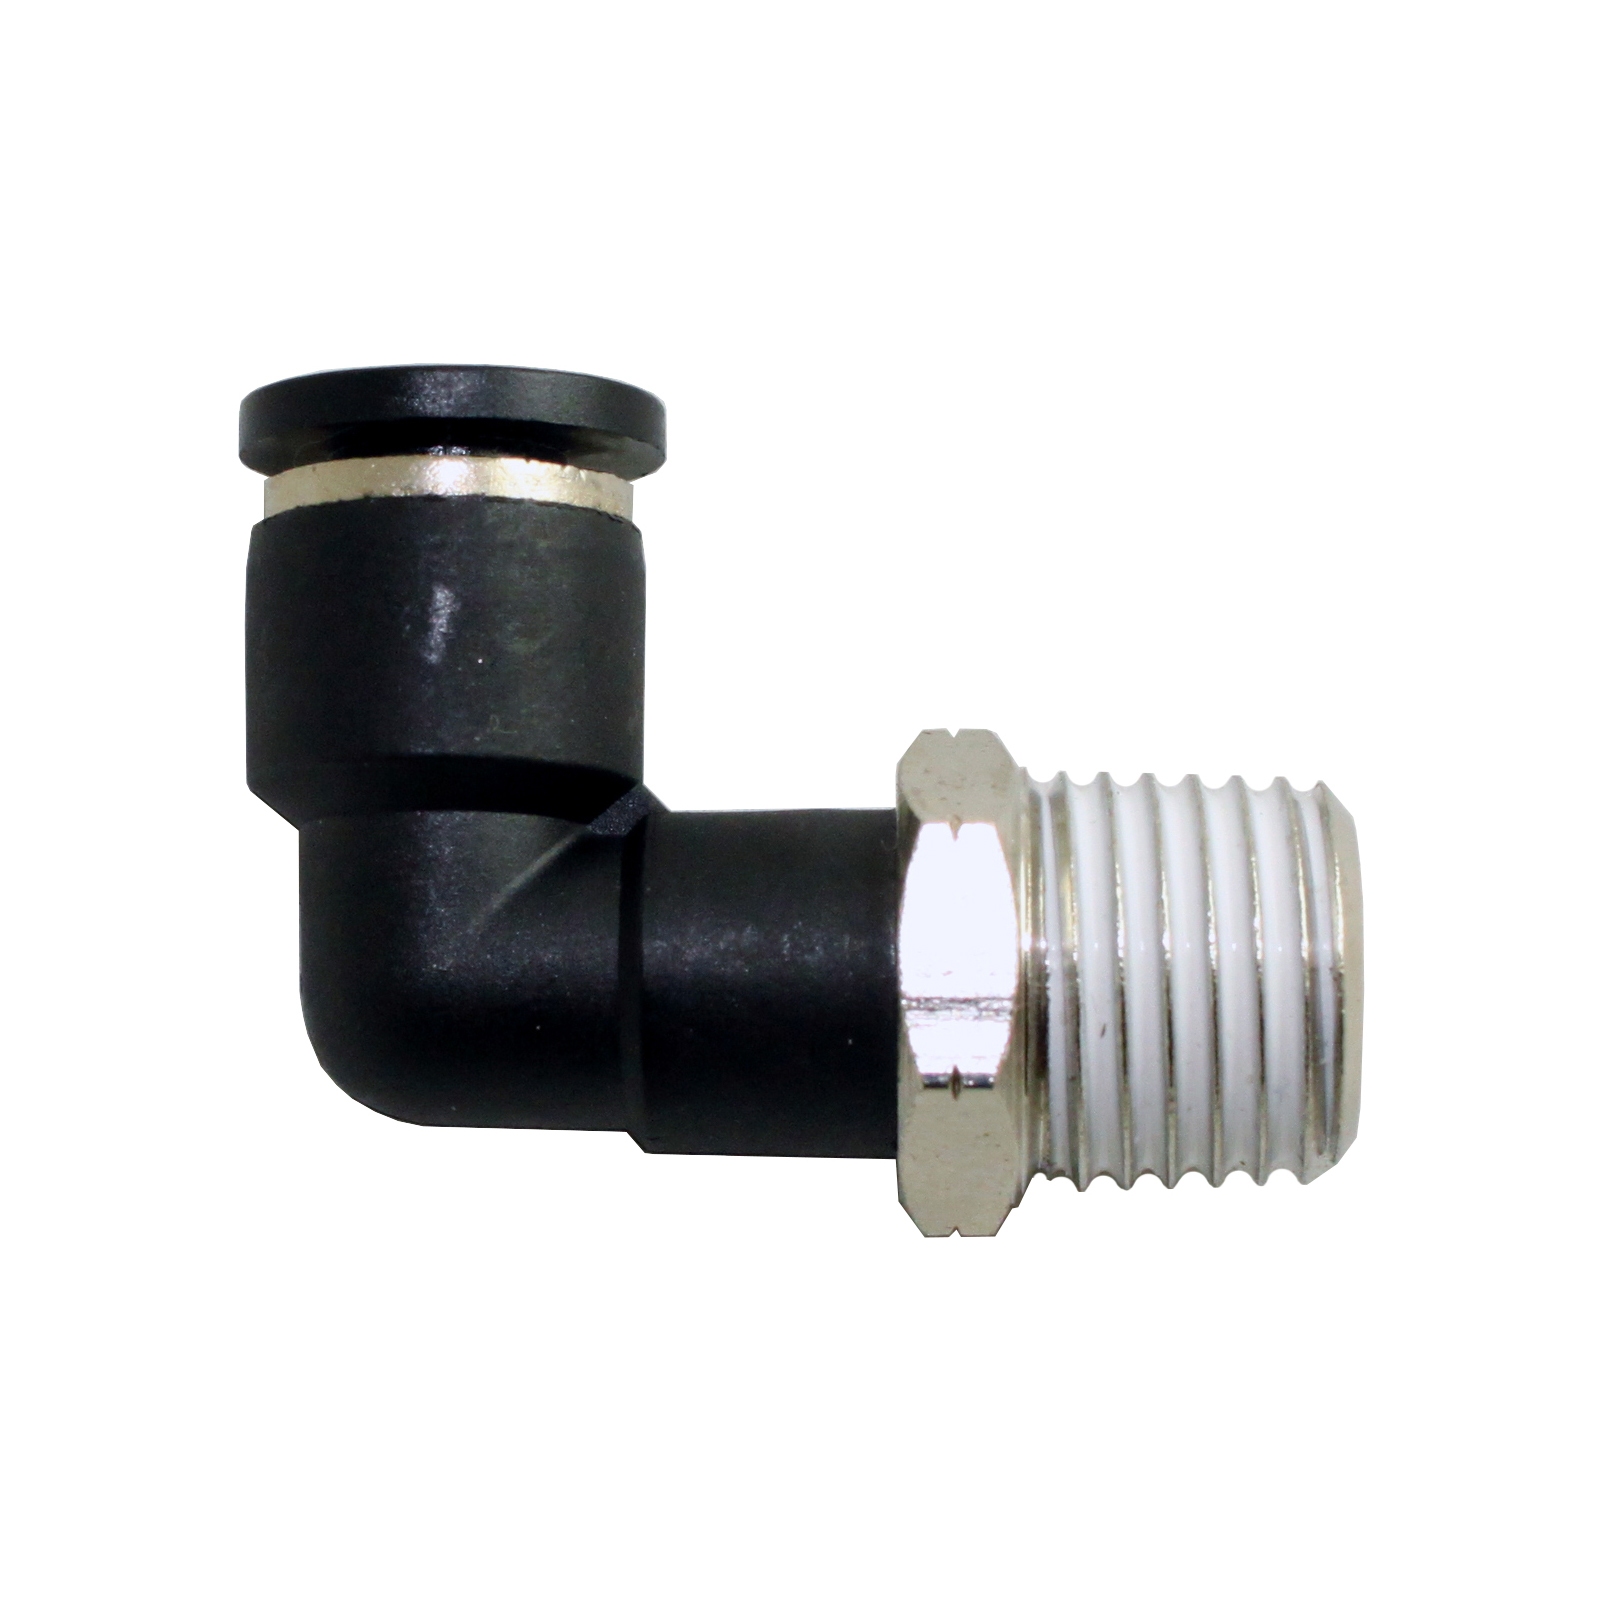 5Pcs Push to Connect Air Fittings Y Type Nylon Tube Connect 4mm OD x 3/8PT Male Thread Tube Fittings Push Lock Black 